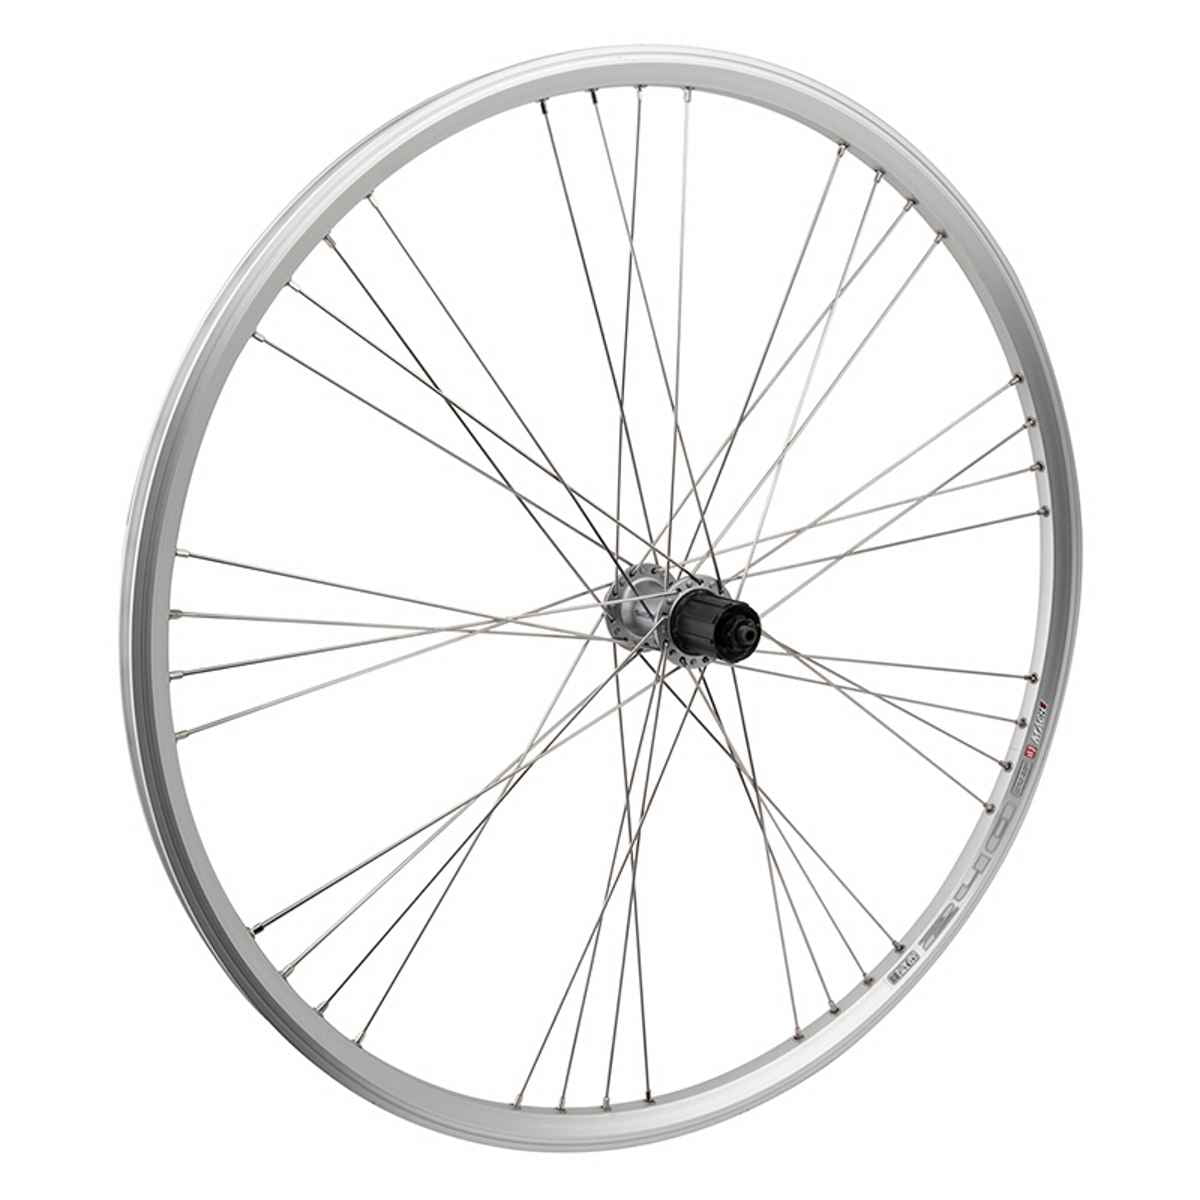 Wheel Master 700C/29 Alloy Hybrid/Comfort Double Wal/Front Bike Whee/700C Is 